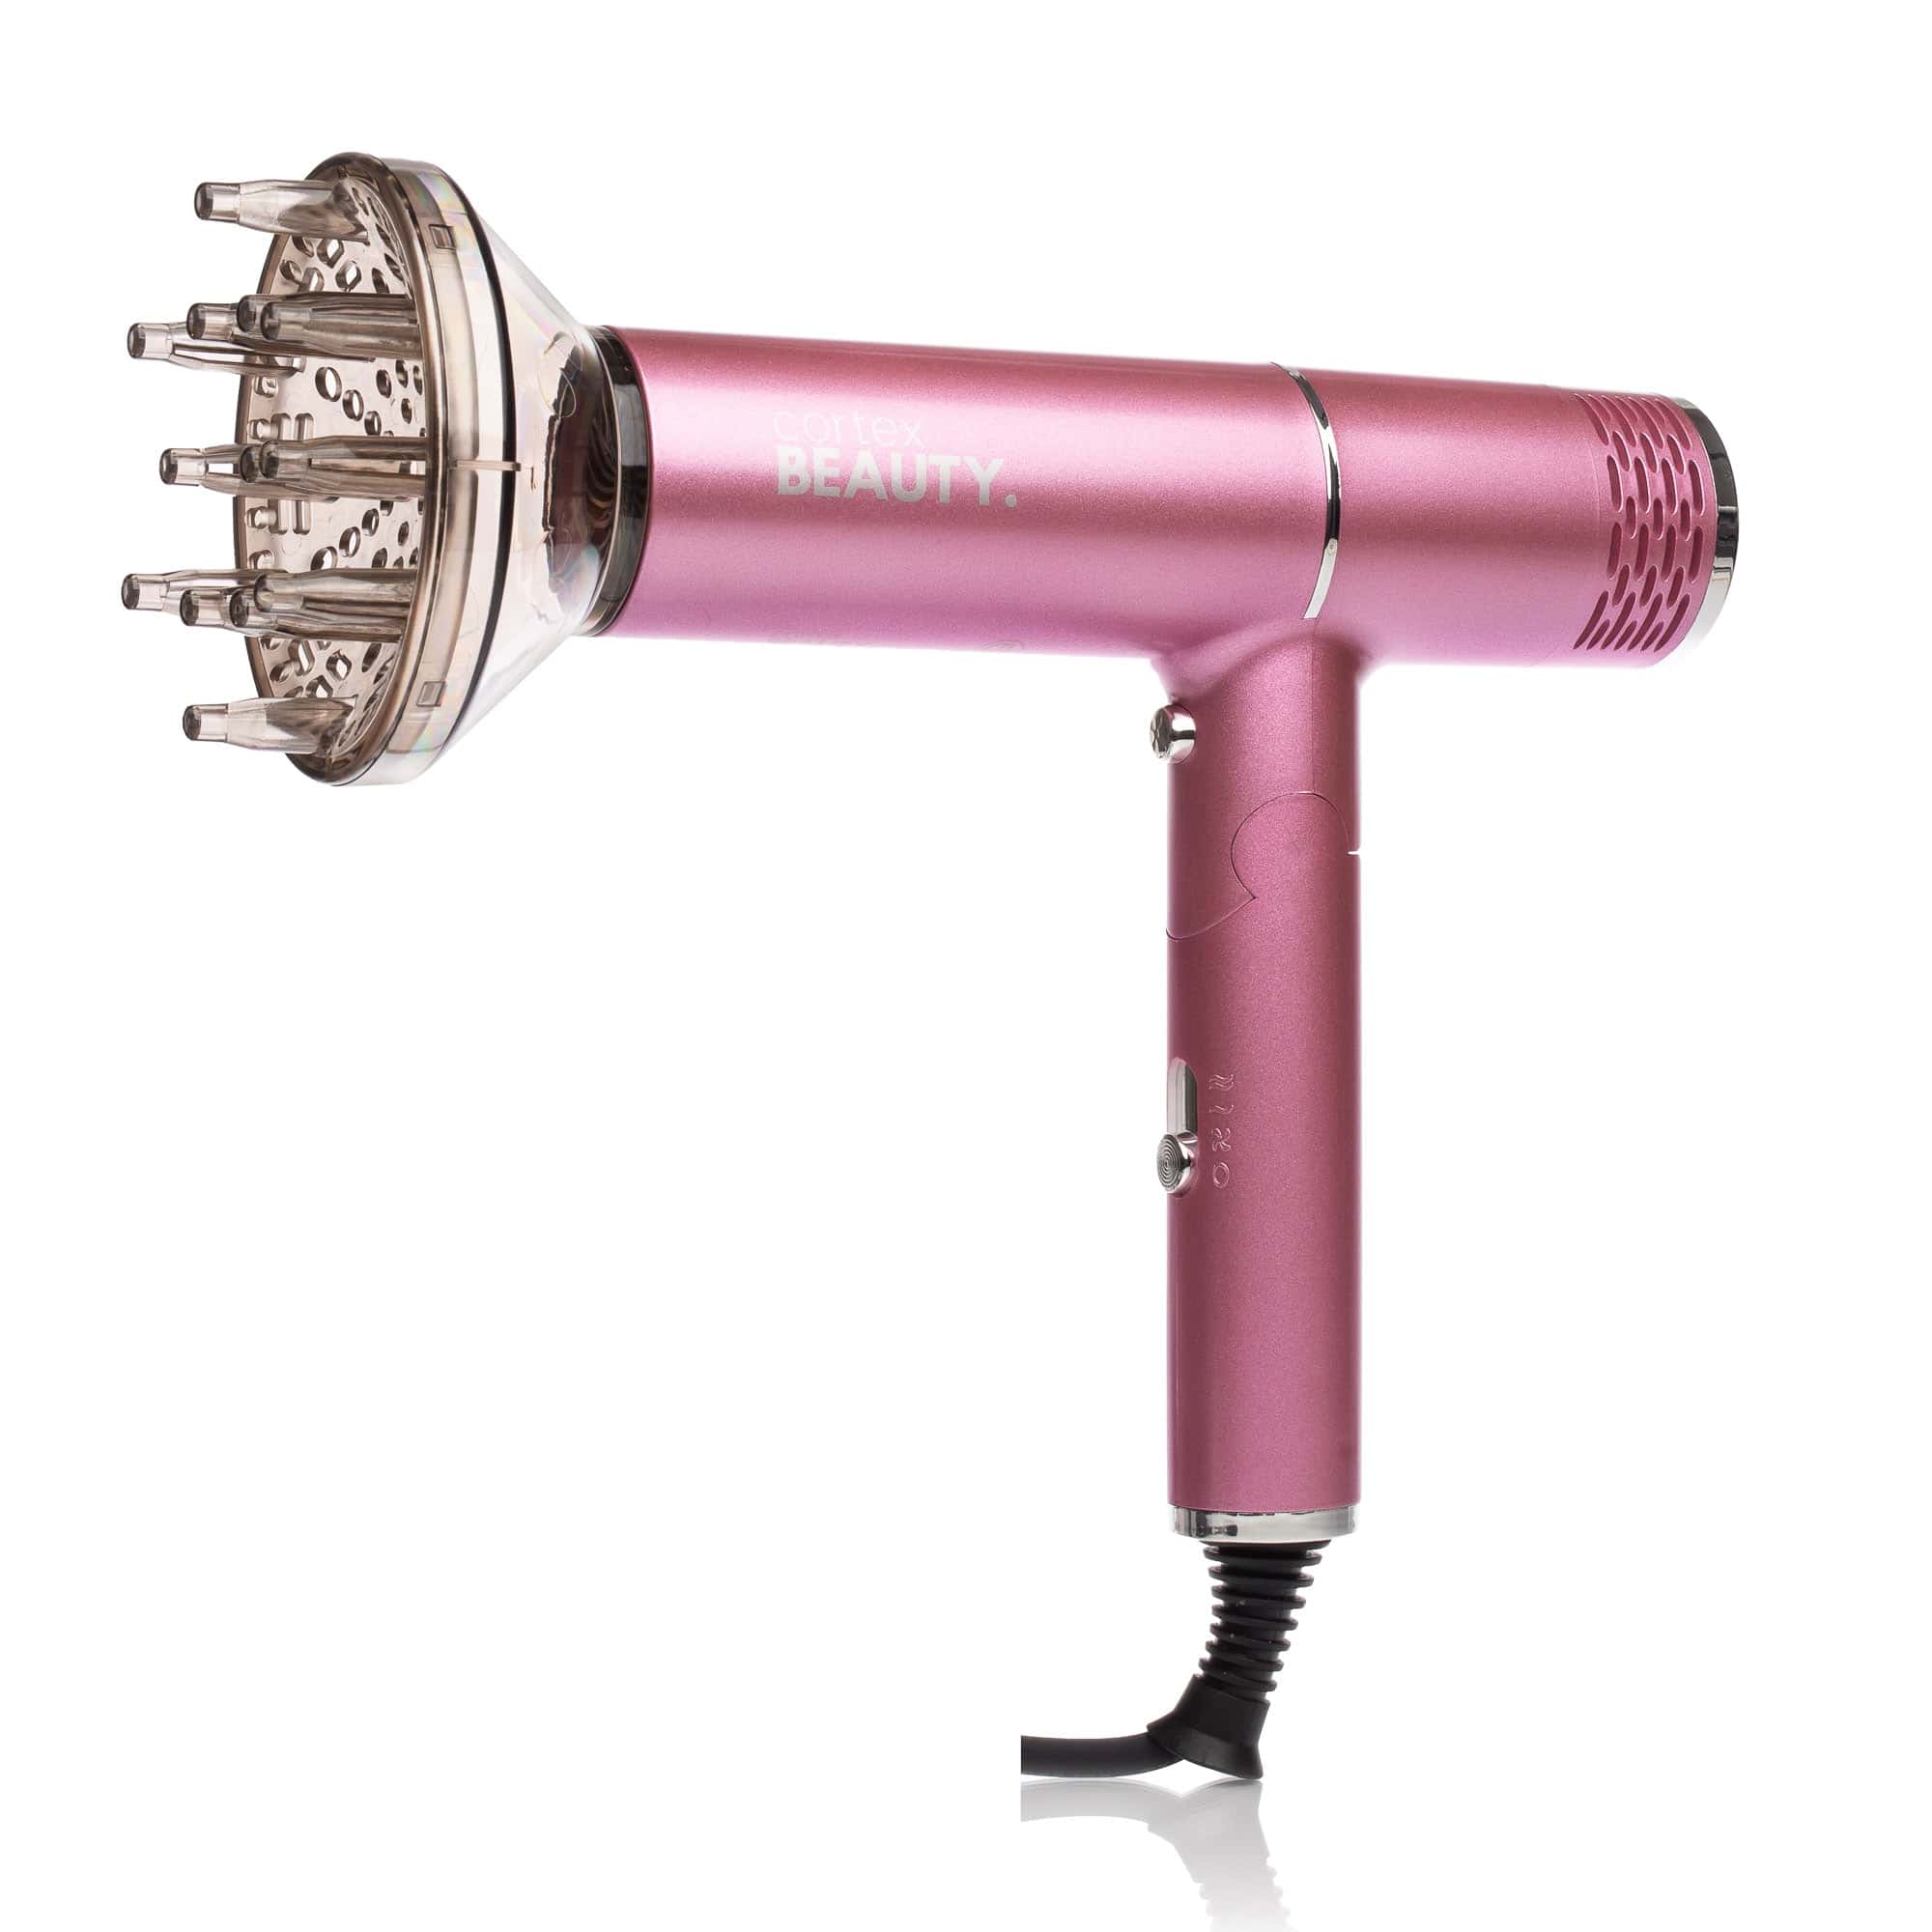 Cortex Beauty AirFold - Ionic Foldable Dryer  + Nozzle and Diffuser